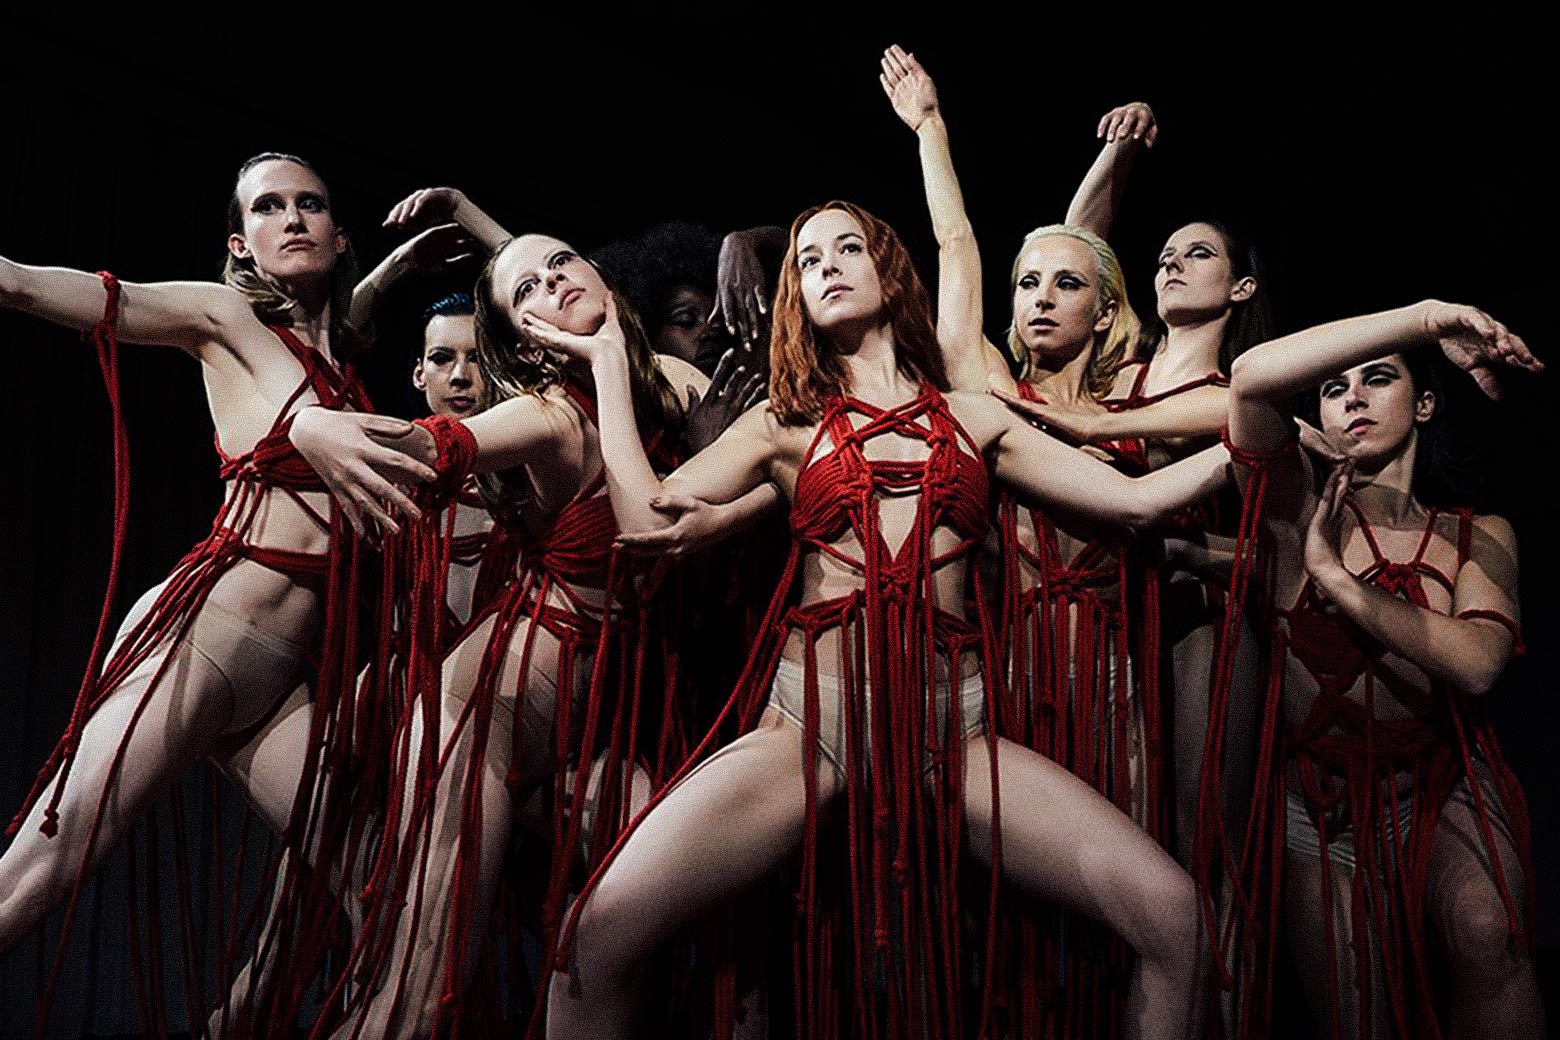 Dancers in red string outfits.